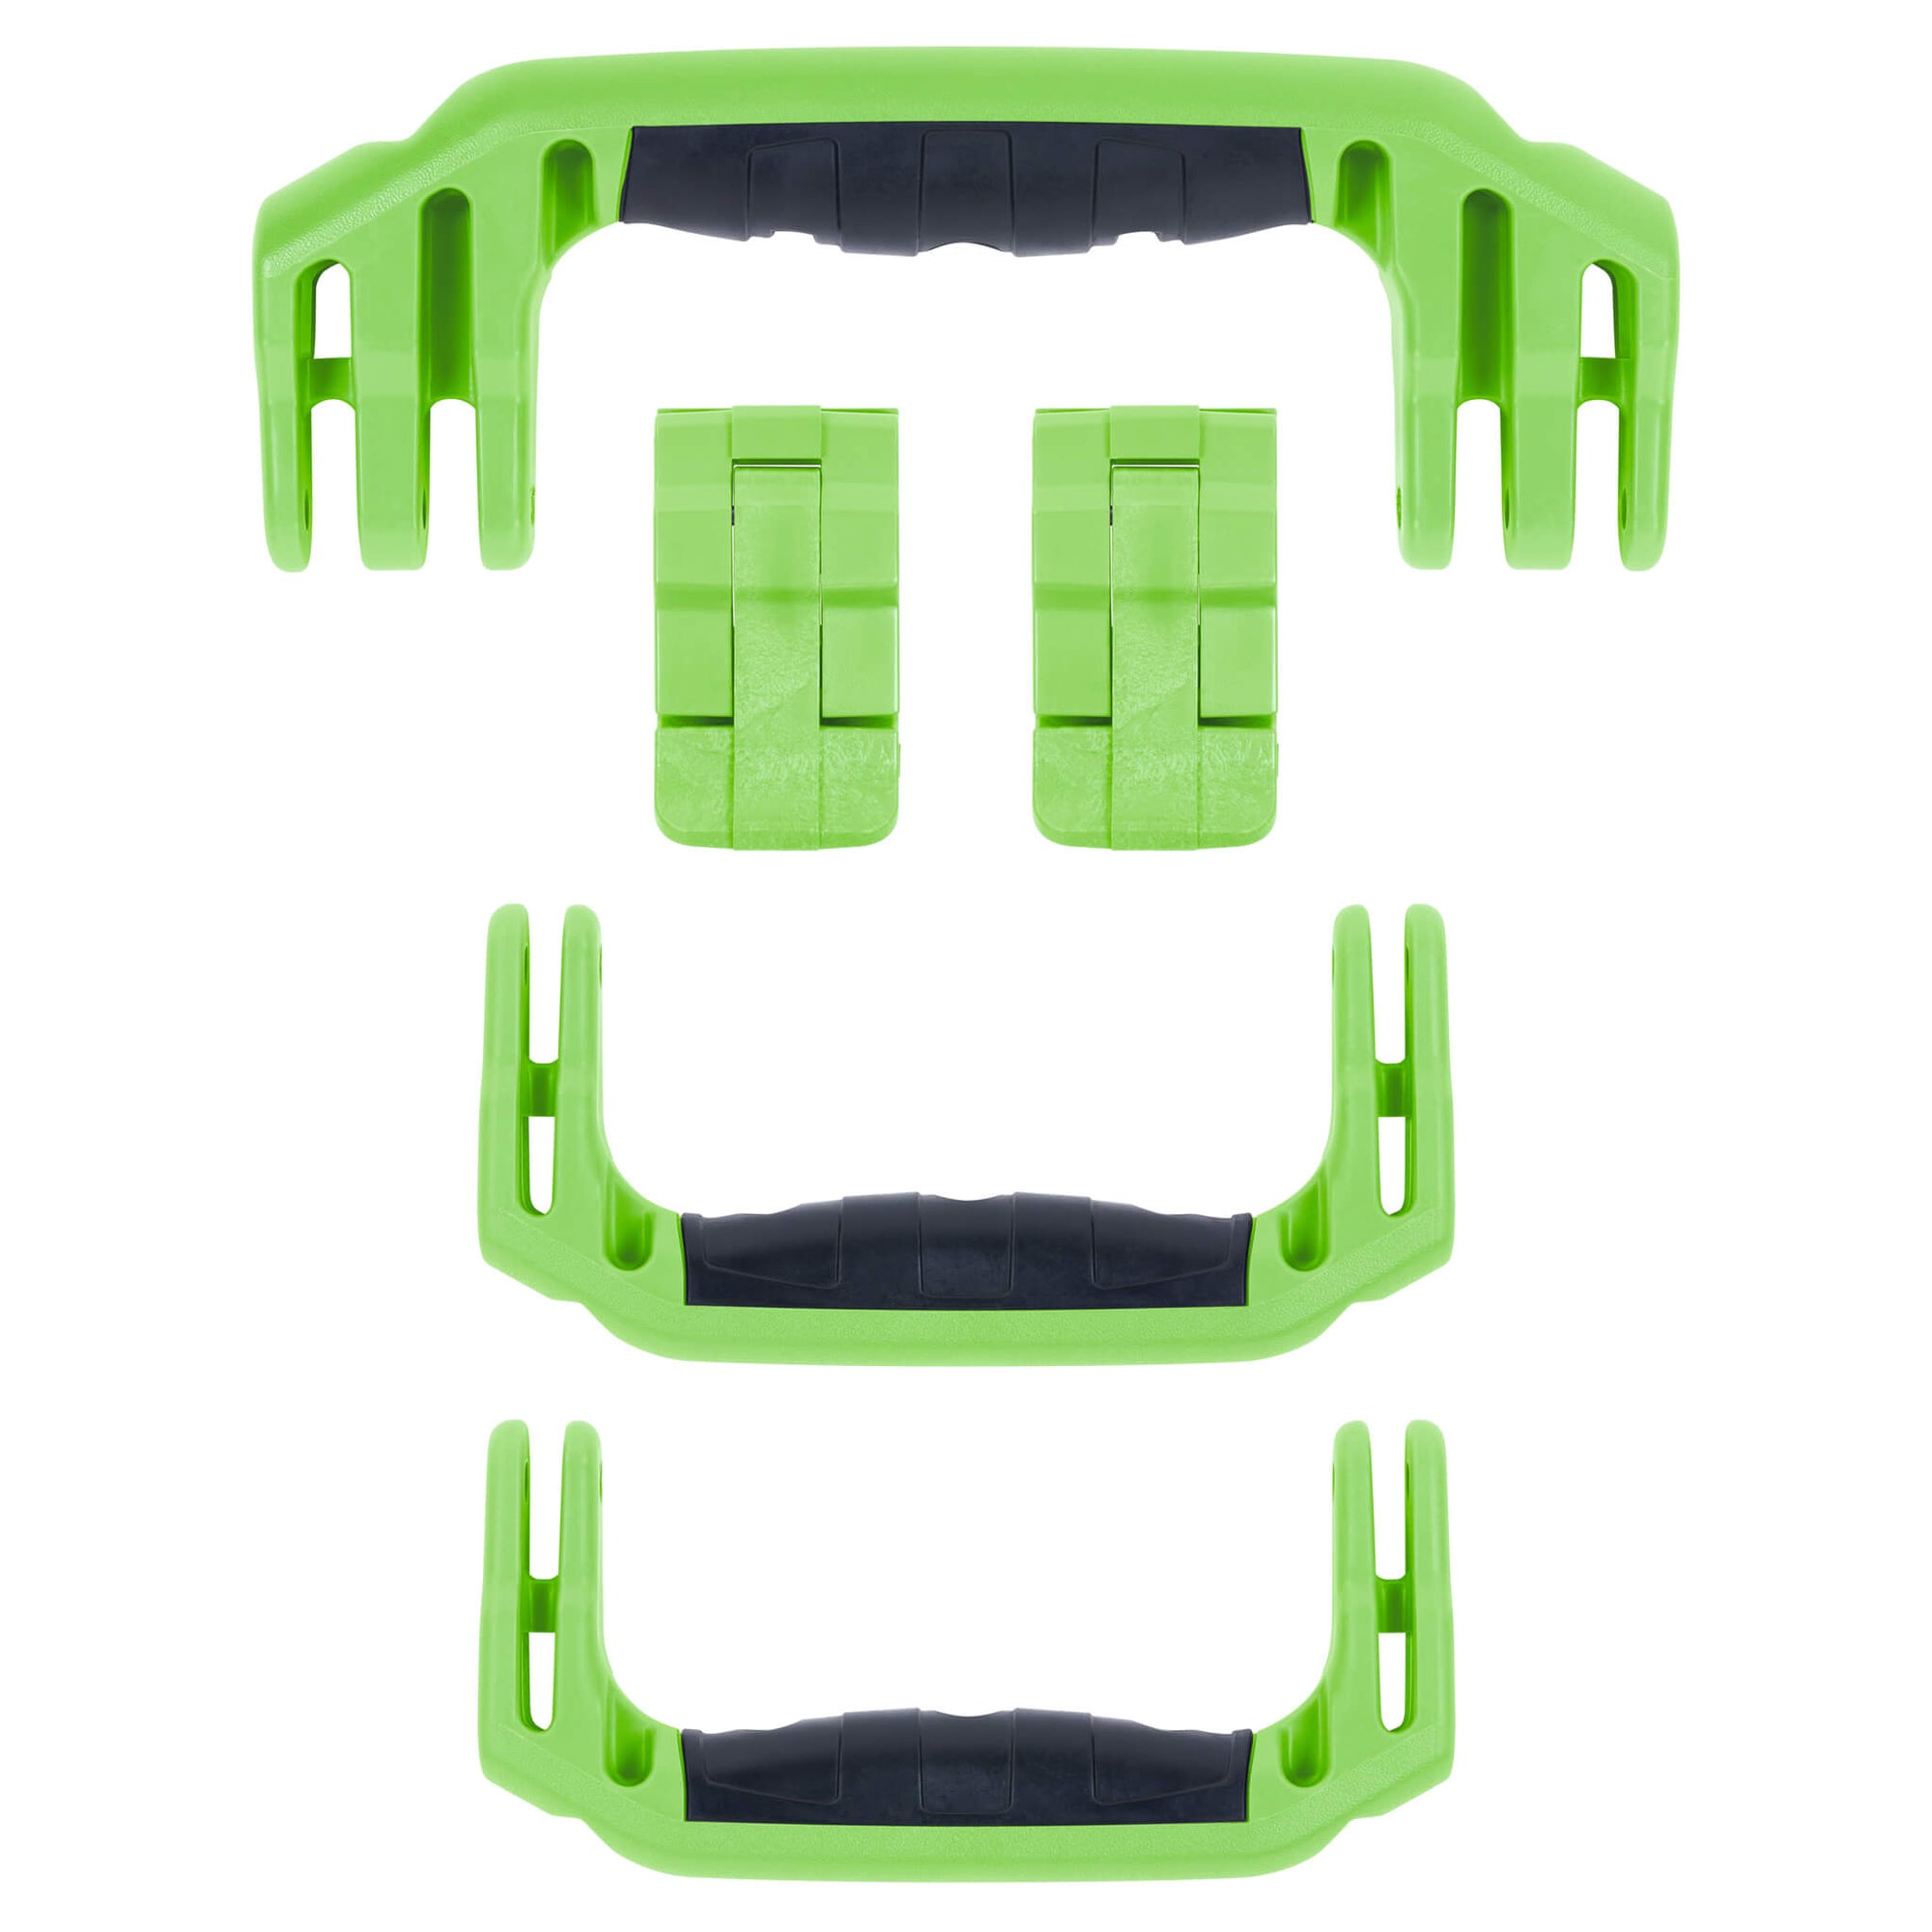 Pelican 1460 Replacement Handles & Latches, Lime Green (Set of 3 Handles, 2 Latches) ColorCase 